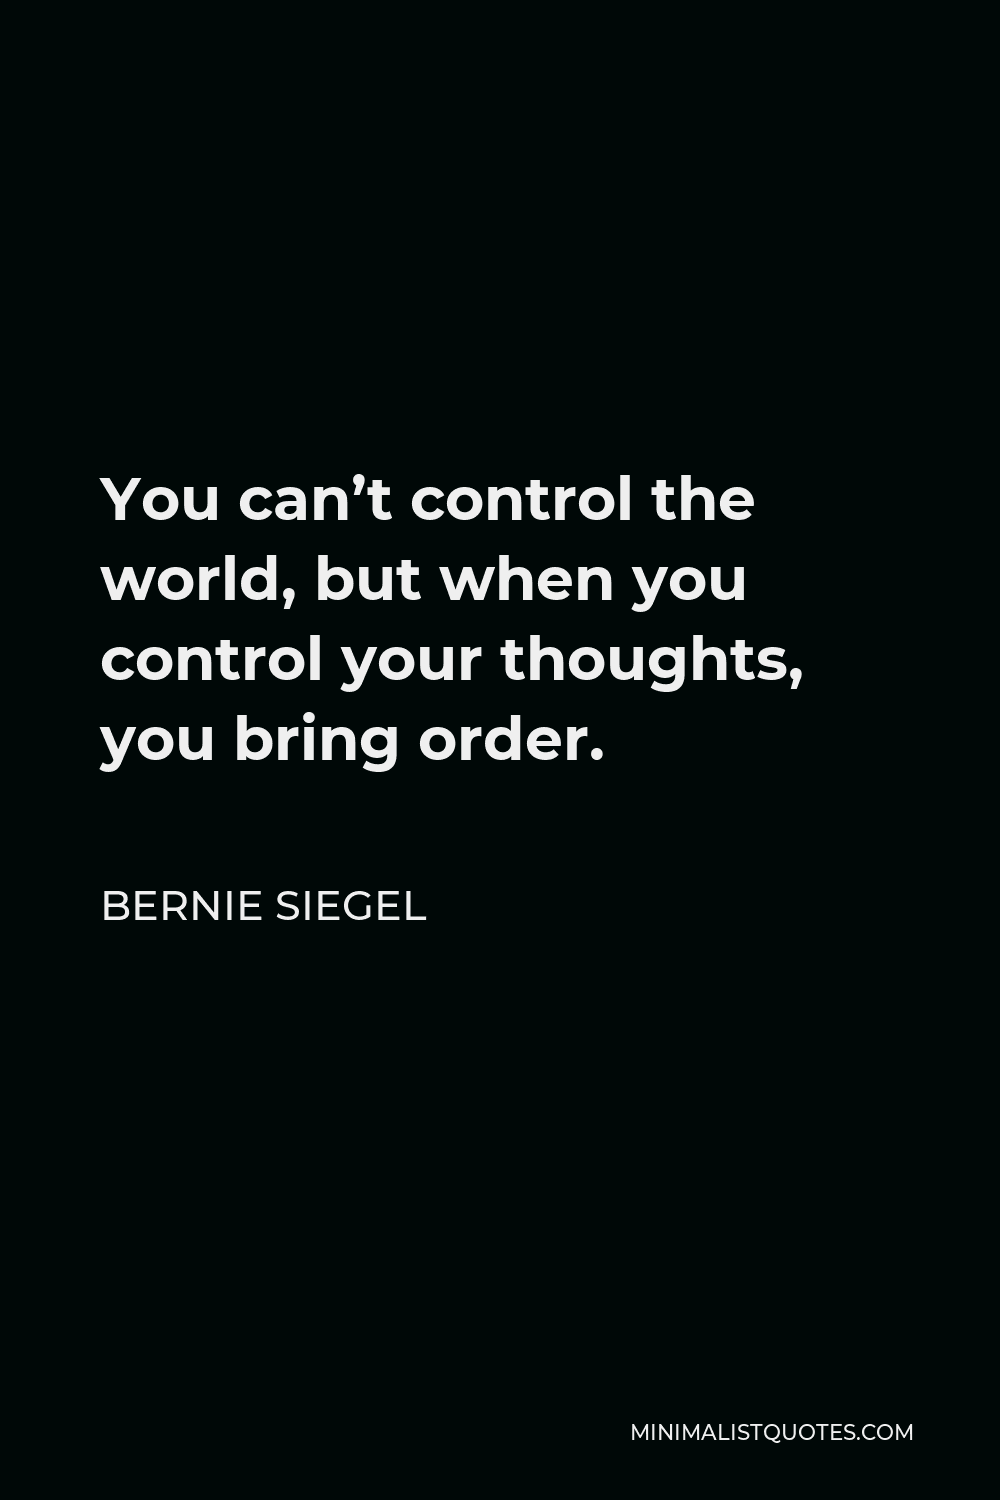 Bernie Siegel Quote - You can’t control the world, but when you control your thoughts, you bring order.